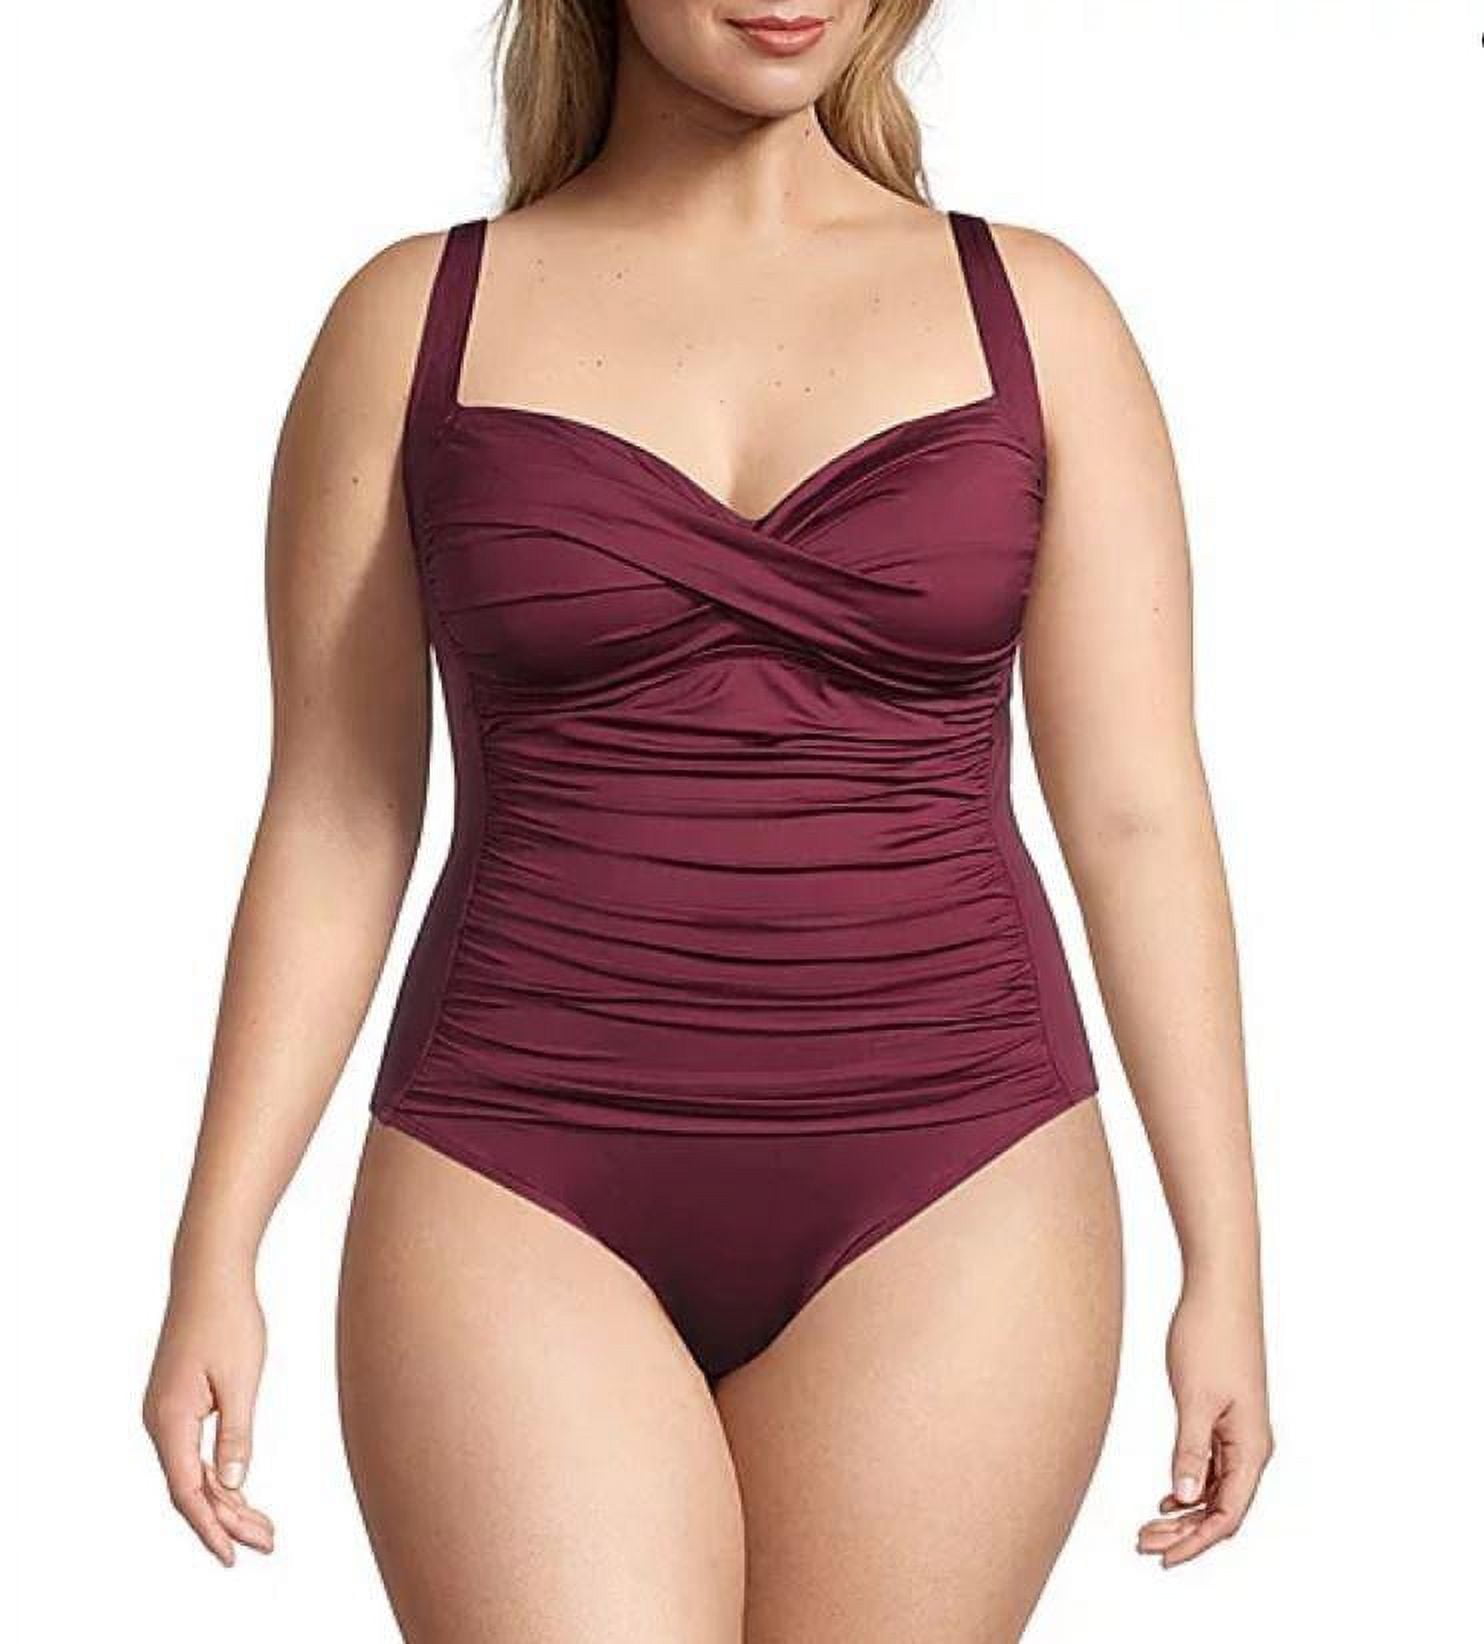 Women's Plus Size Slimming Control Ruched Front One Piece Swimsuit -  Dreamsuit by Miracle Brands Burgundy 22W, Red 